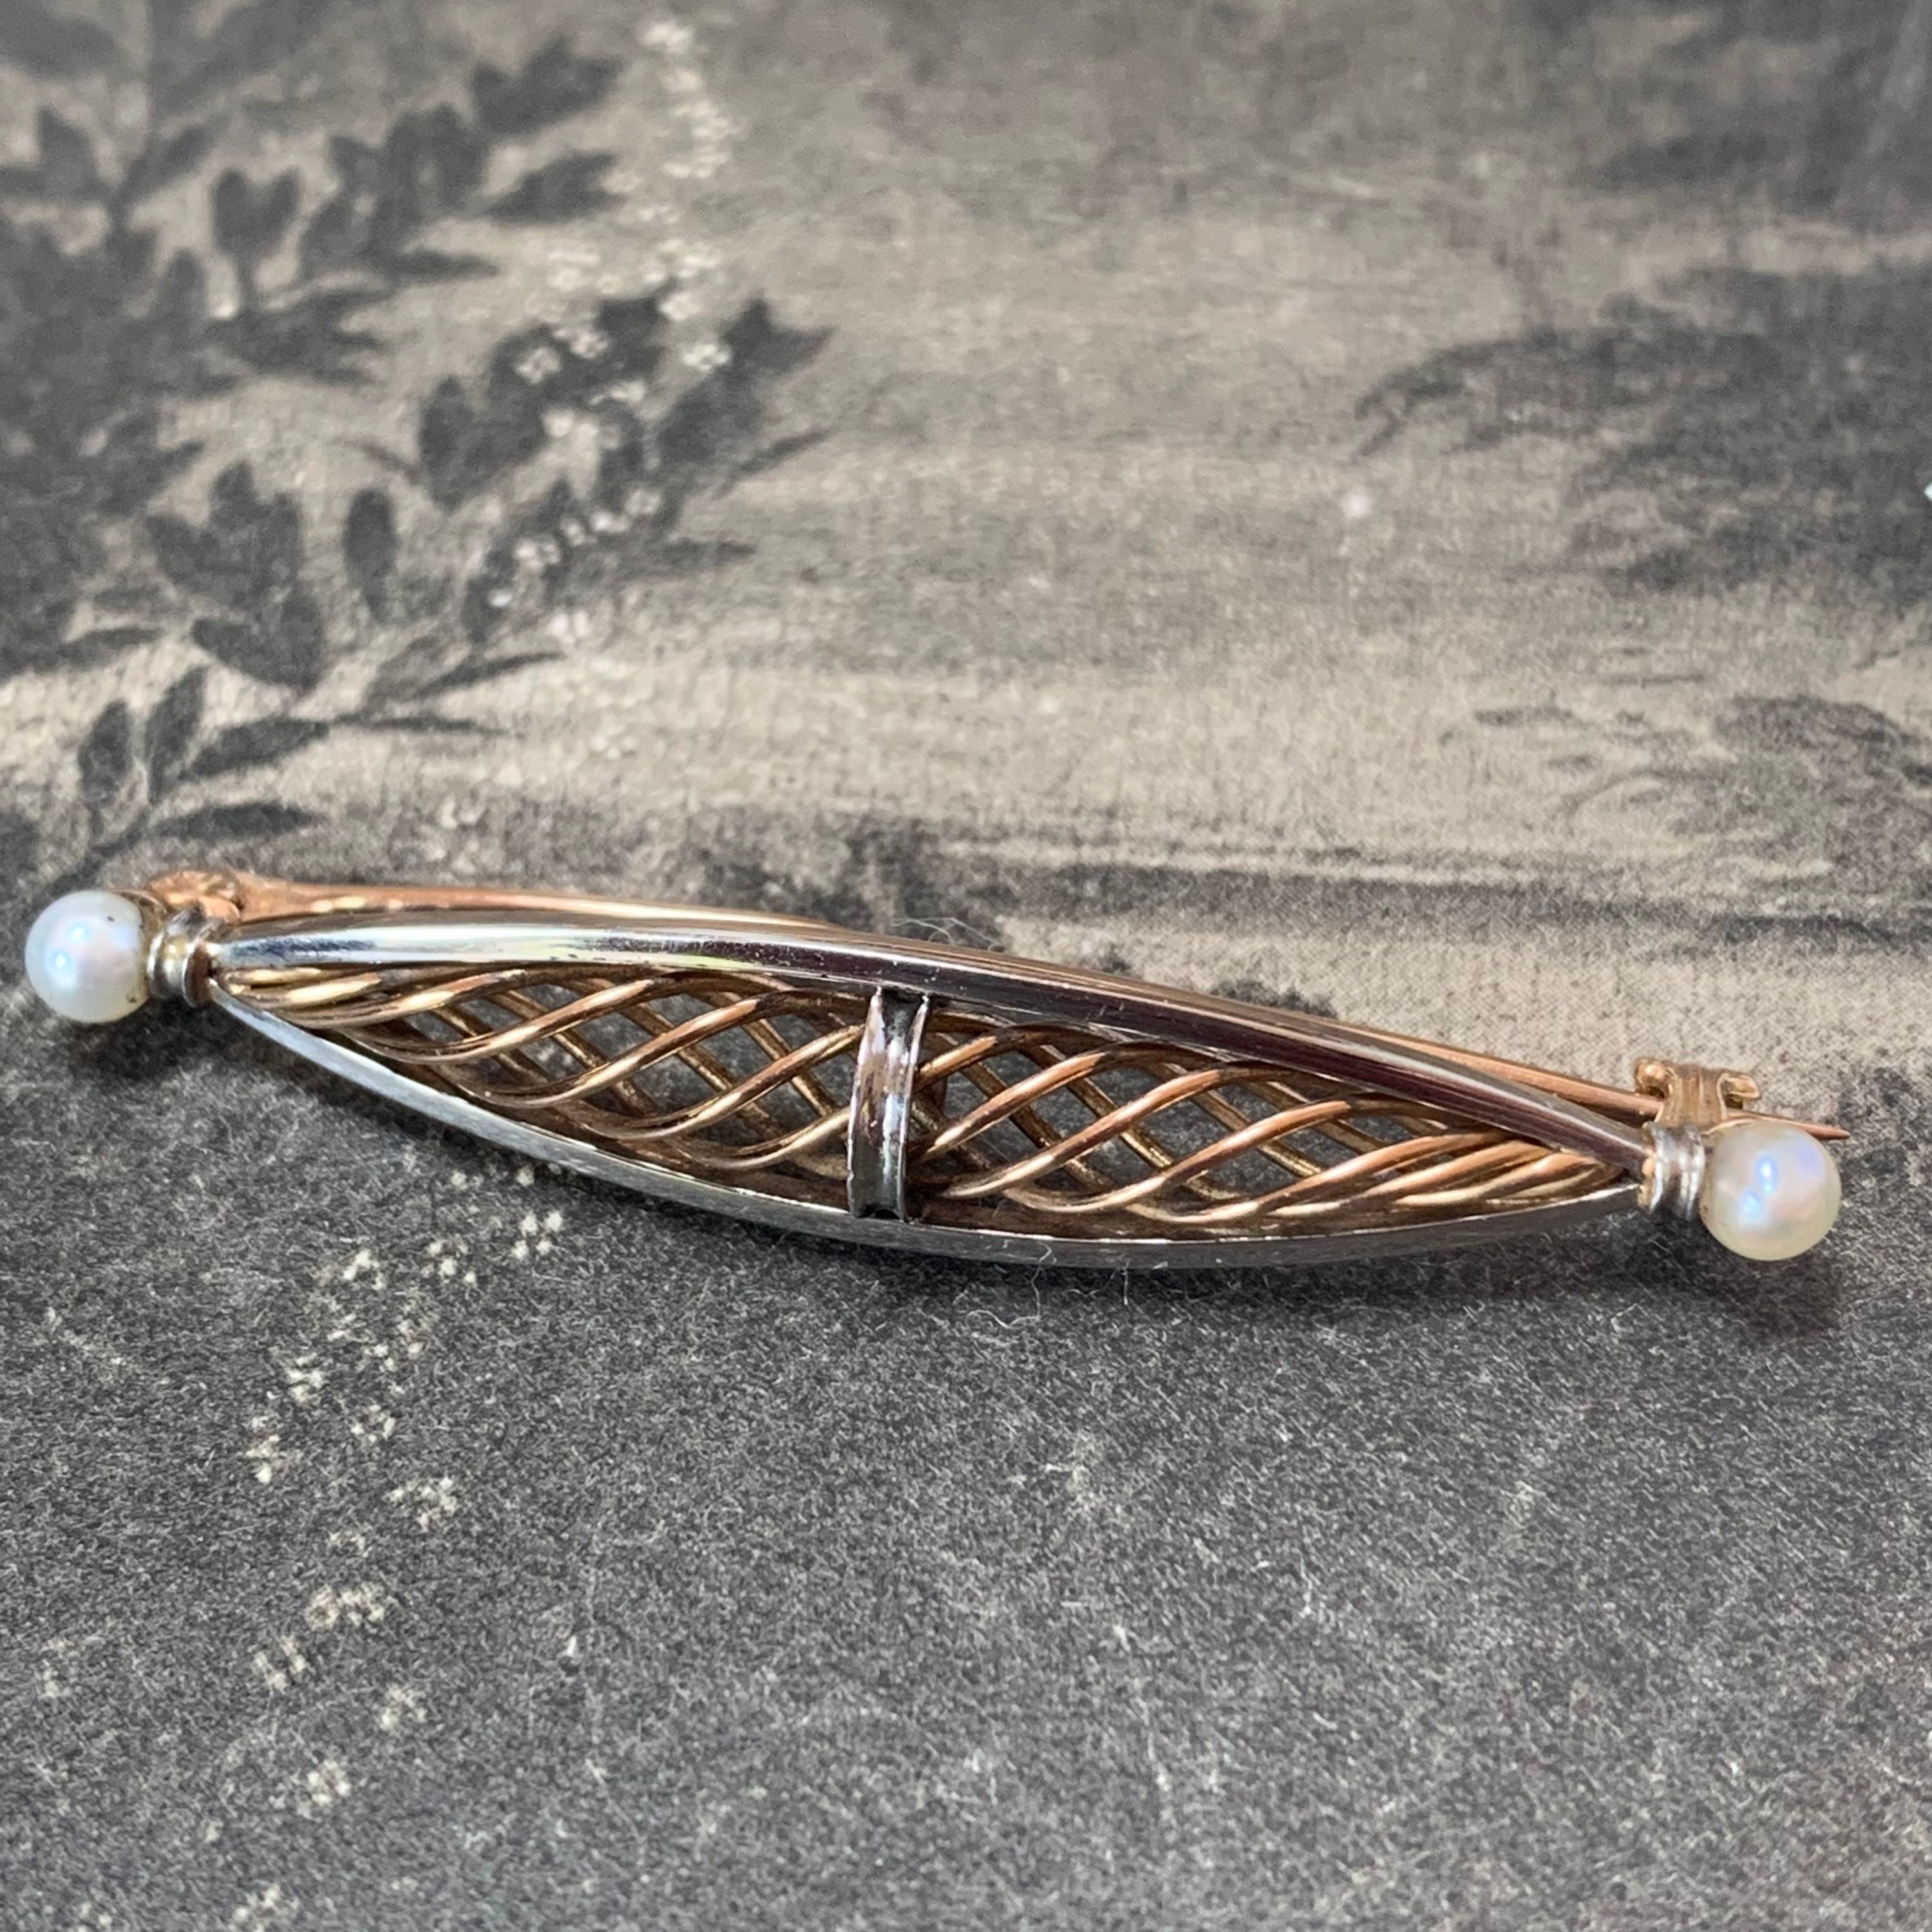 Antique 18Ct Rose Gold & Platinum Brooch With Pearl Terminations. A Stunning Very Unusual Edwardian Keepsake Gift